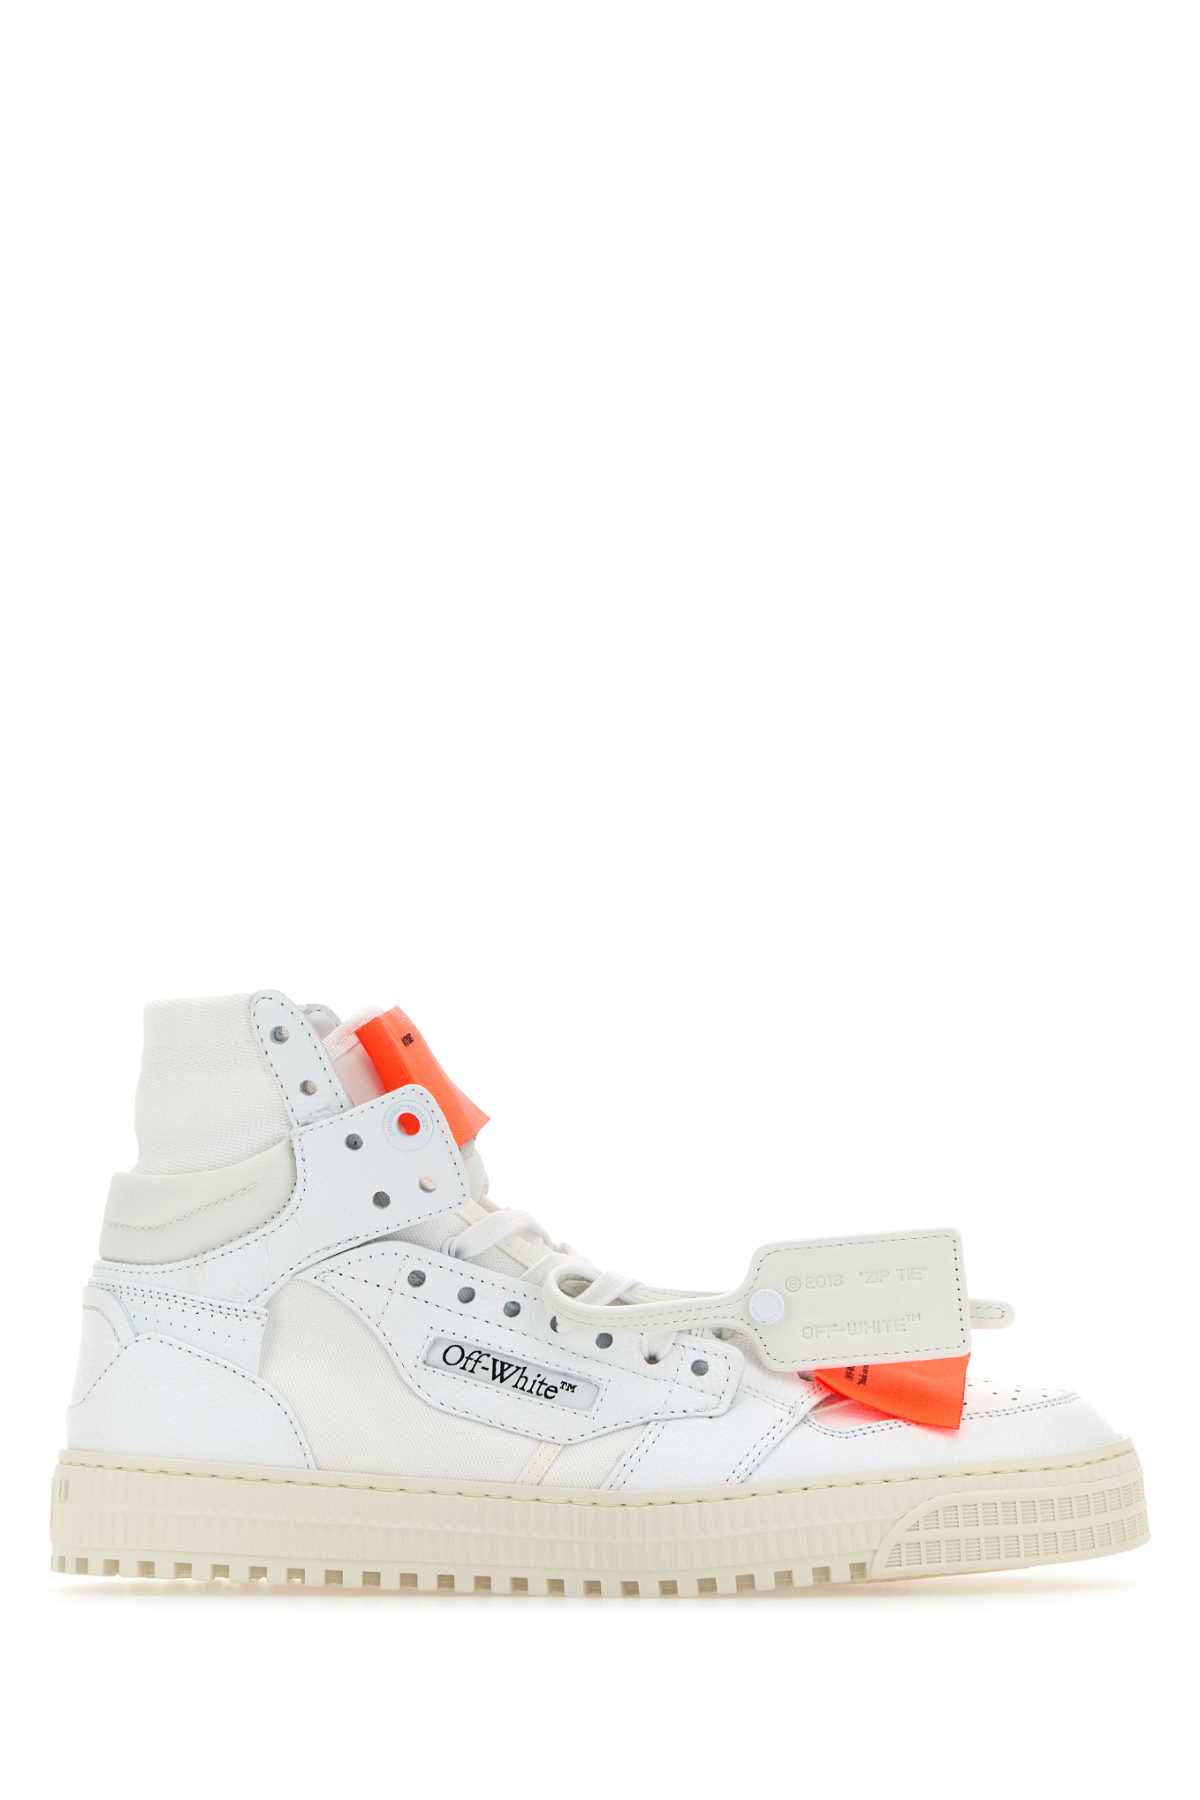 OFF-WHITE WHITE LEATHER AND CANVAS 3.0 OFF COURT SNEAKERS